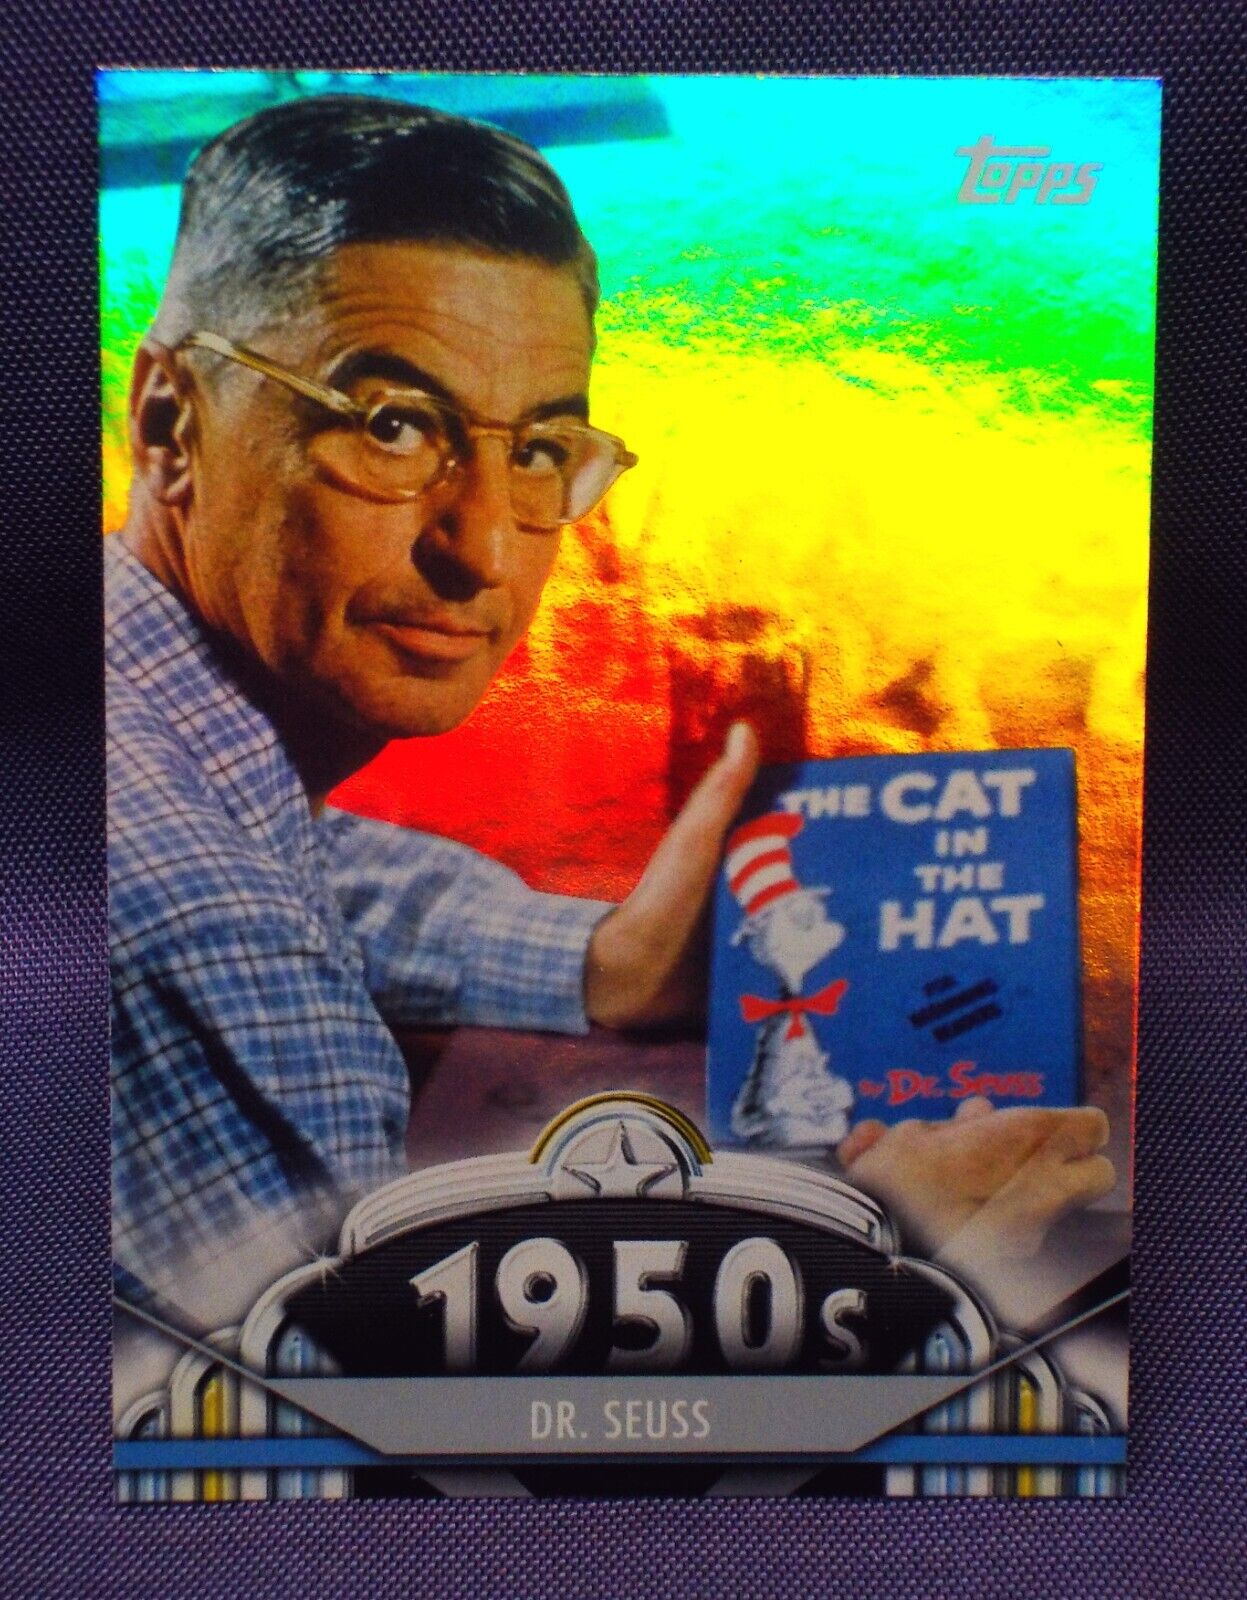 2011 Topps American Pie Limited Edition ✦ HOLO FOIL Refractor card #59 Dr. Seuss